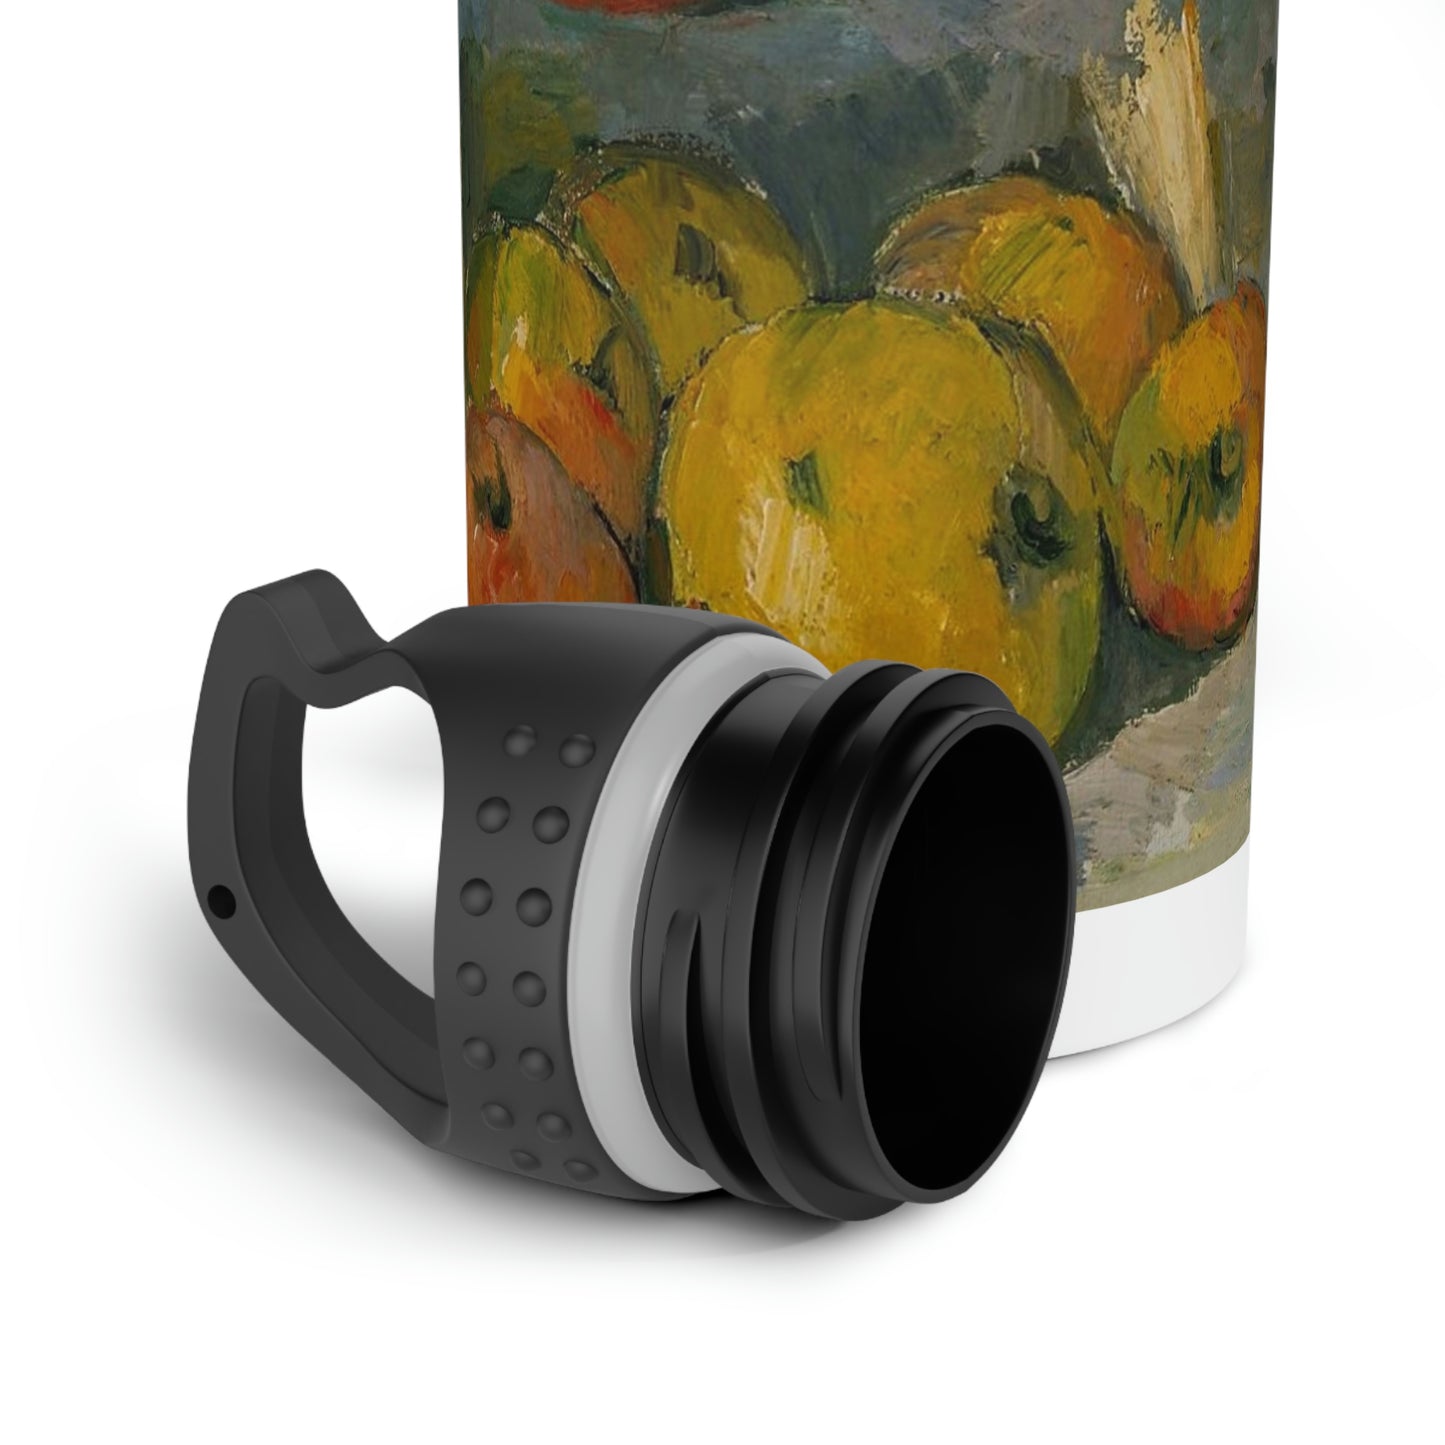 Apples - Cezanne - 1878 - Stainless Steel Water Bottle - Limited Edition